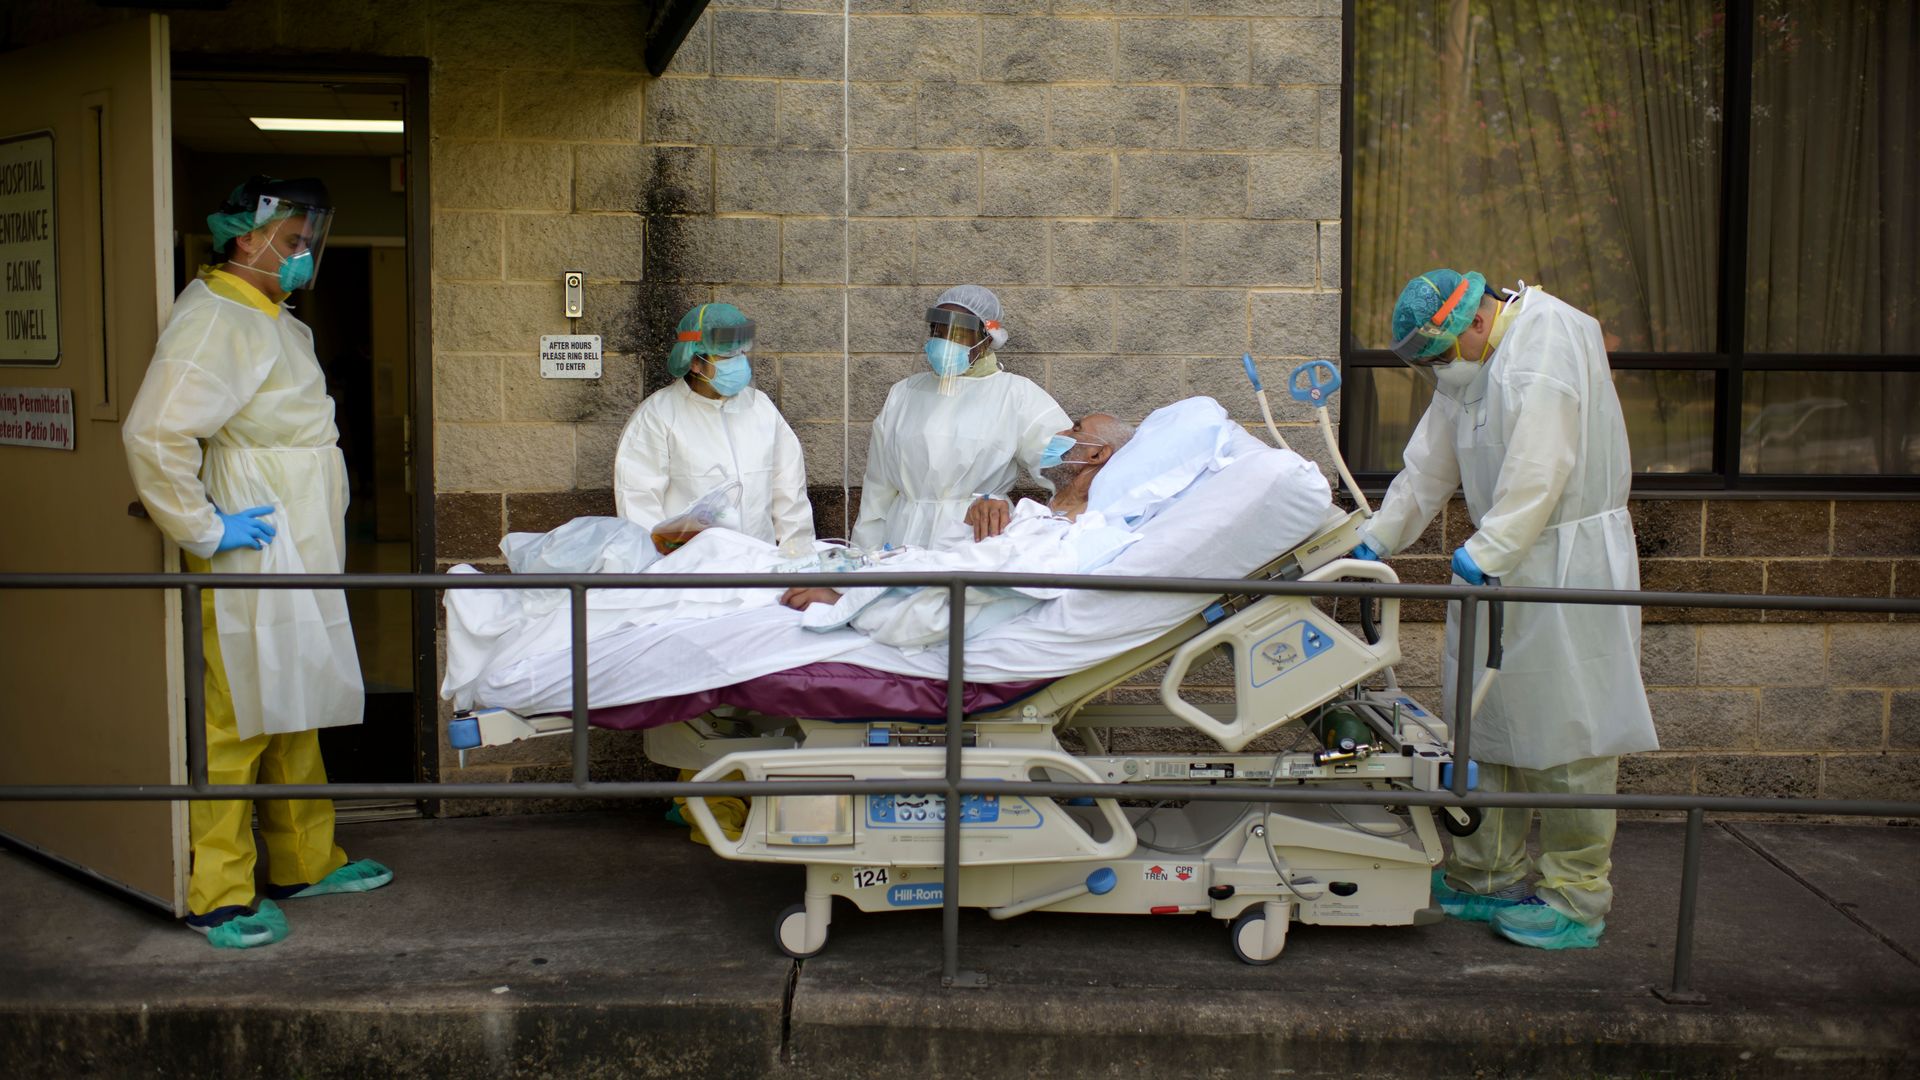 A coronavirus patient is wheeled in a hospital bed by workers in masks and gowns.